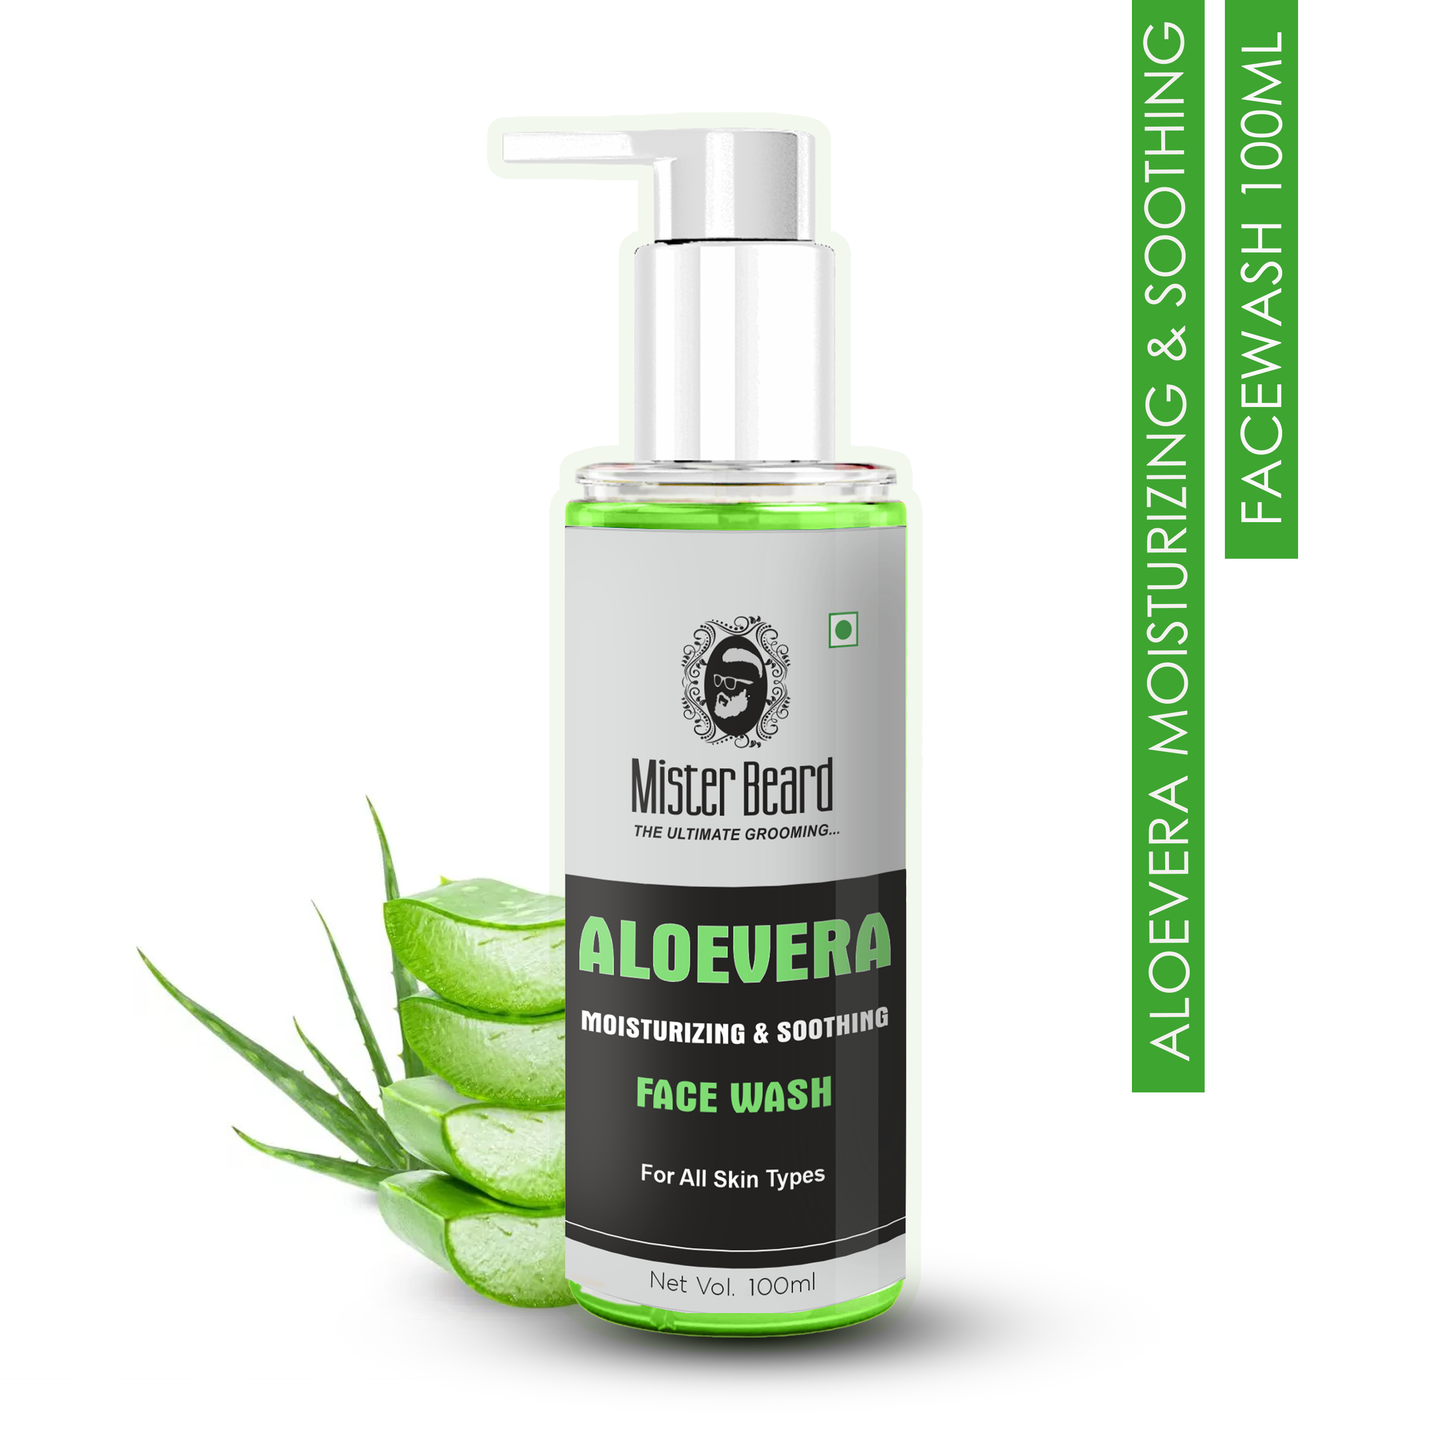 Mister Beard Aloe Vera Moisturizing Facewash 100ml - Aloe Vera Hydrating Gentle - With Aloe leaf Extract, Pro Vitamin B5 - For Cleansing, Hydrating Skin - No Parabens, Sulphate, Silicones & Color